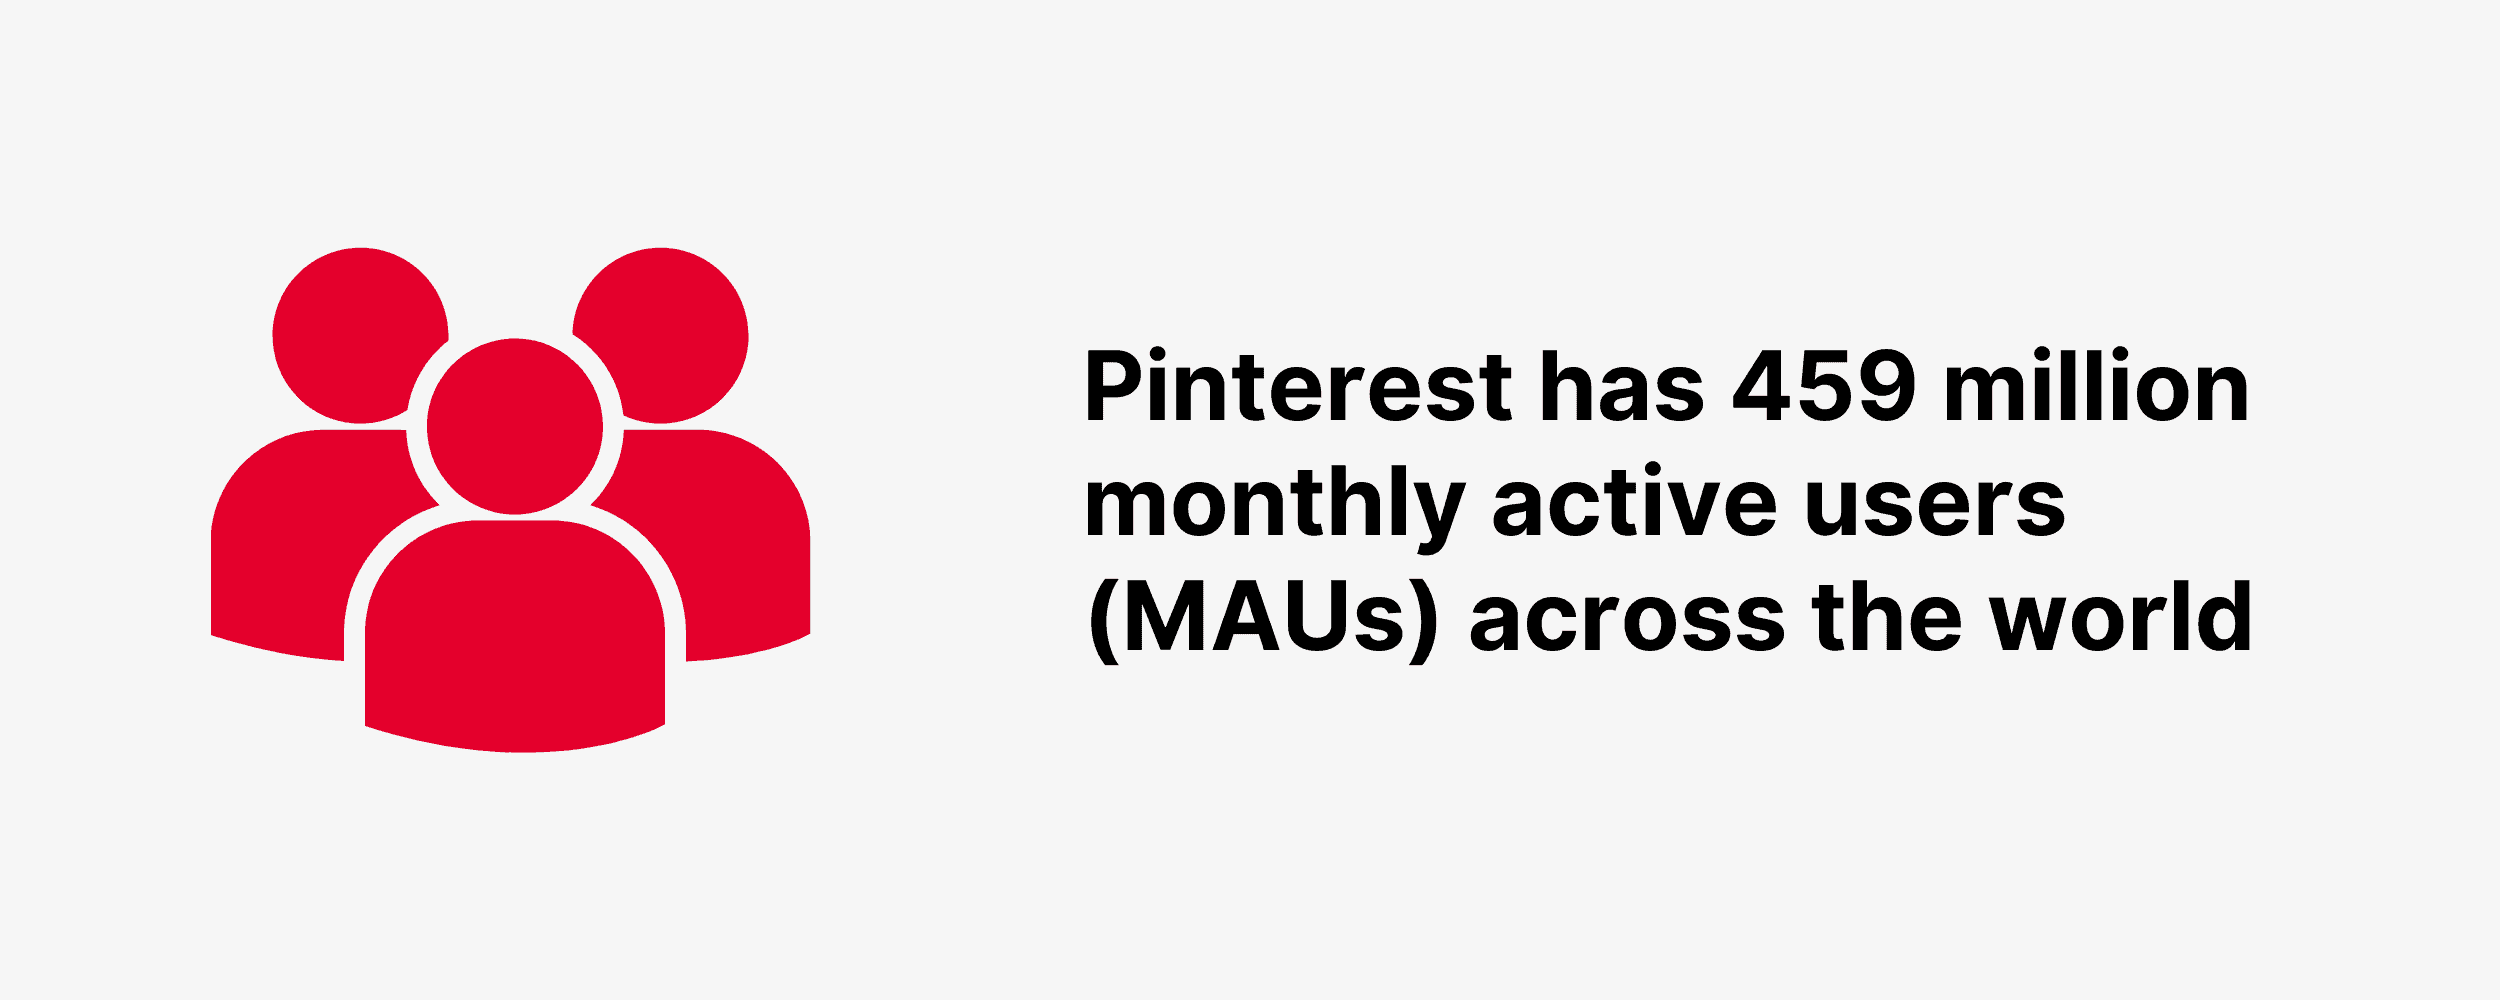 Pinterest has 459 million monthly active users (MAUs) across the world